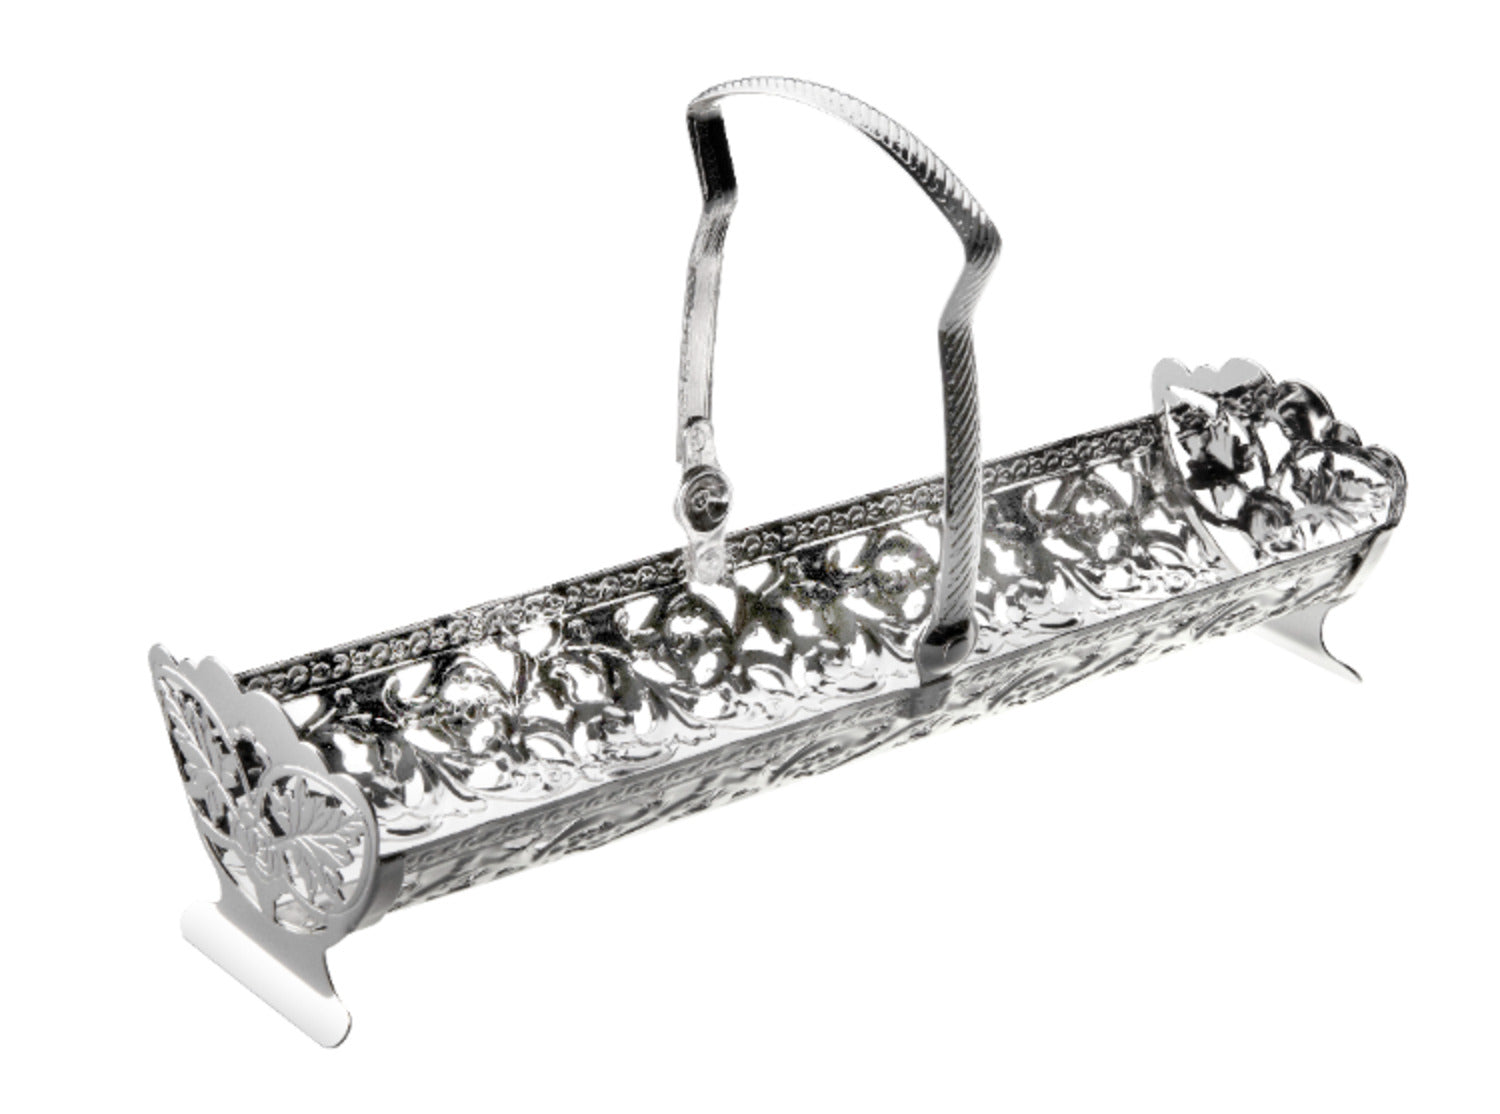 Queen Anne Biscuit Holder with Handle -23x12.5x7cm -Silver Plated